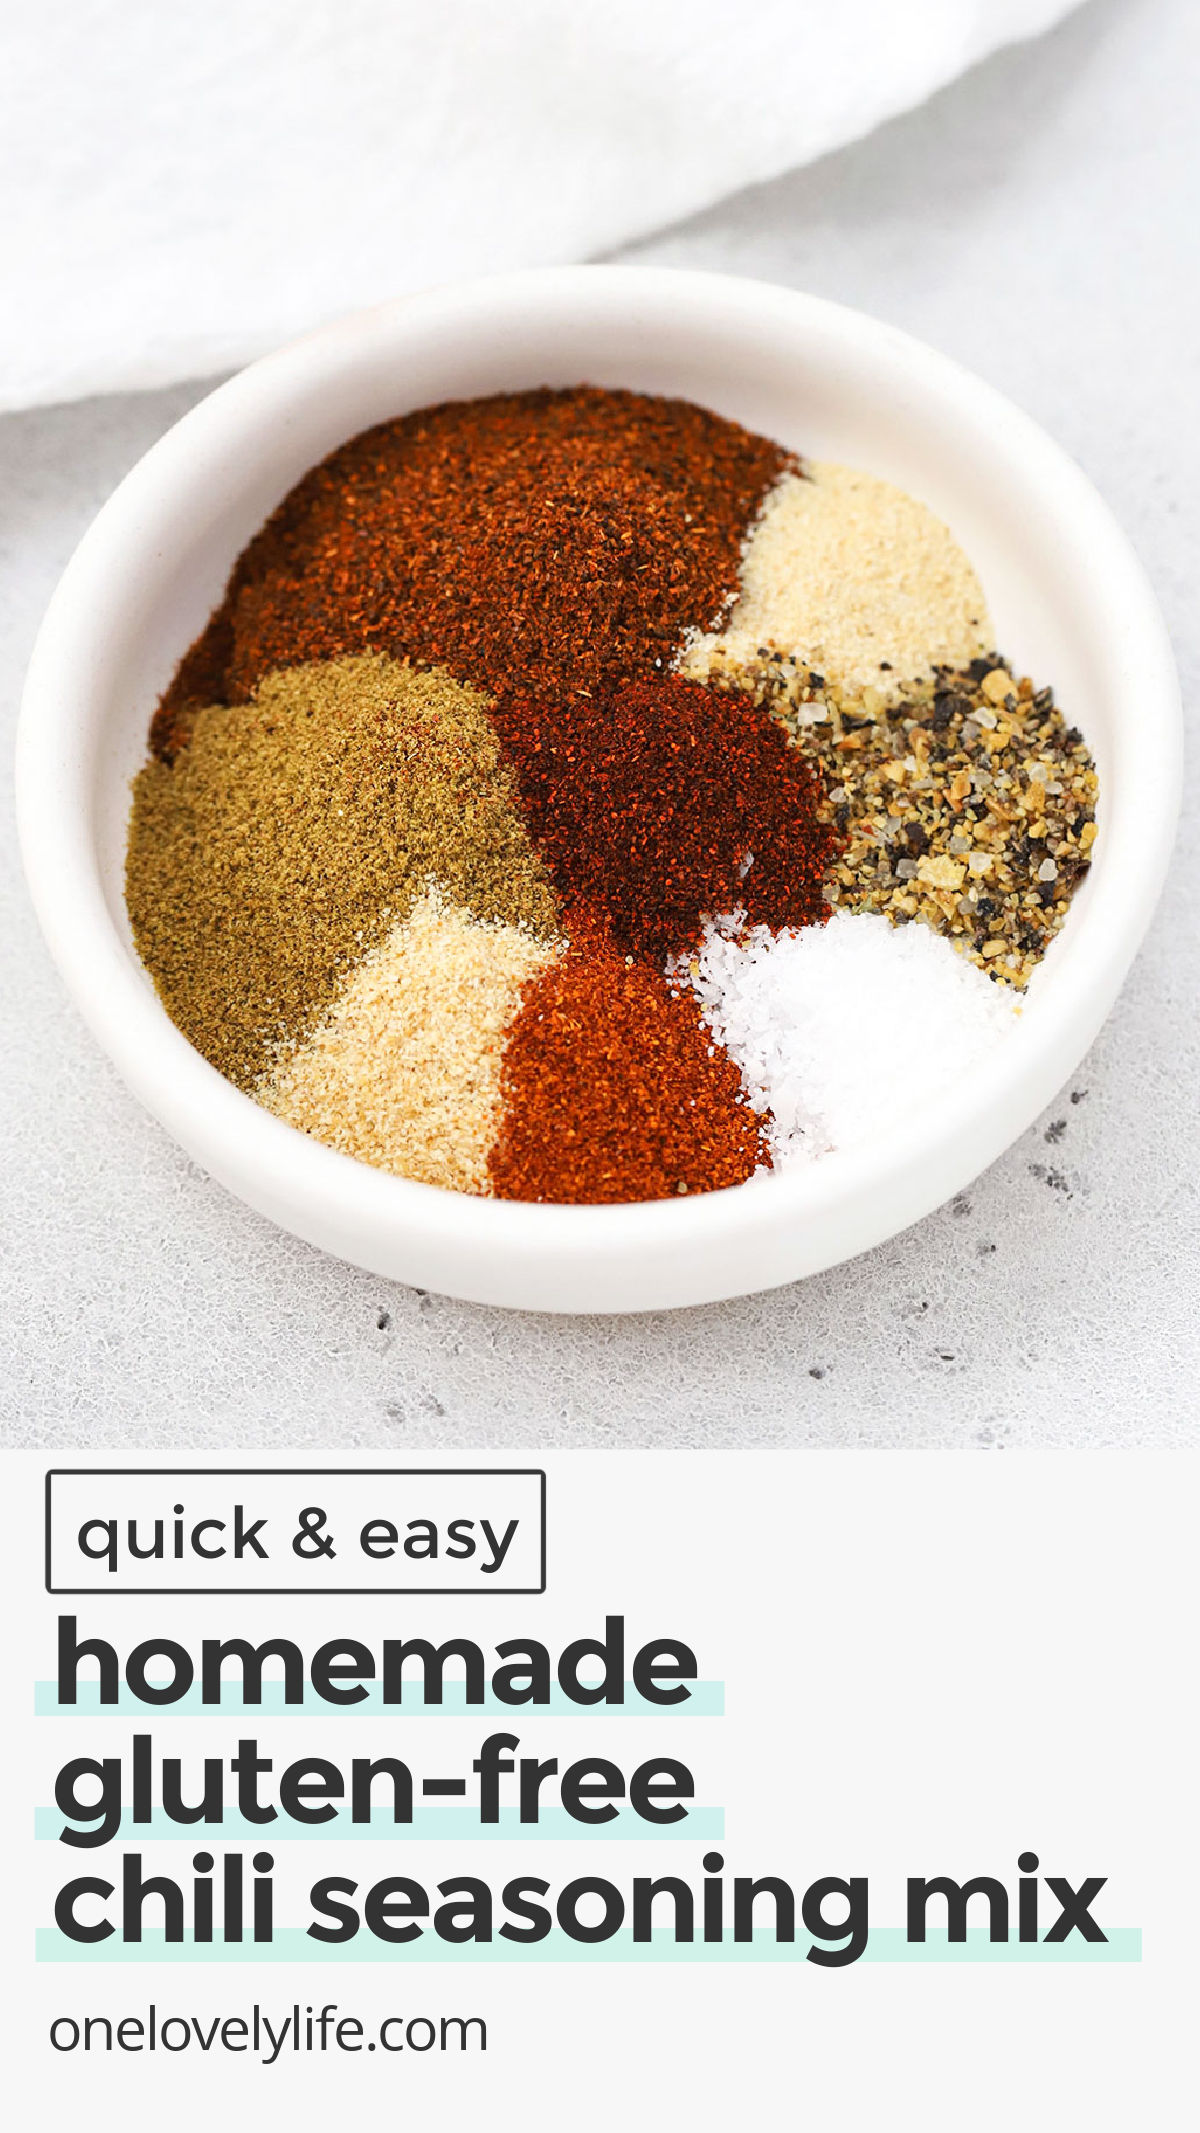 This easy gluten-free chili seasoning mix is a delicious blend that makes homemade chili taste incredible. (Naturally vegan, paleo & whole30) // gluten free chili seasoning / gluten free chili seasoning packet / the best gluten-free chili seasoning / gluten free chili seasoning brands / gluten free chili spices / gluten free chili spice mix / gluten free chili packet / gluten free spice mix / homemade chili seasoning / homemade gluten free chili seasoning